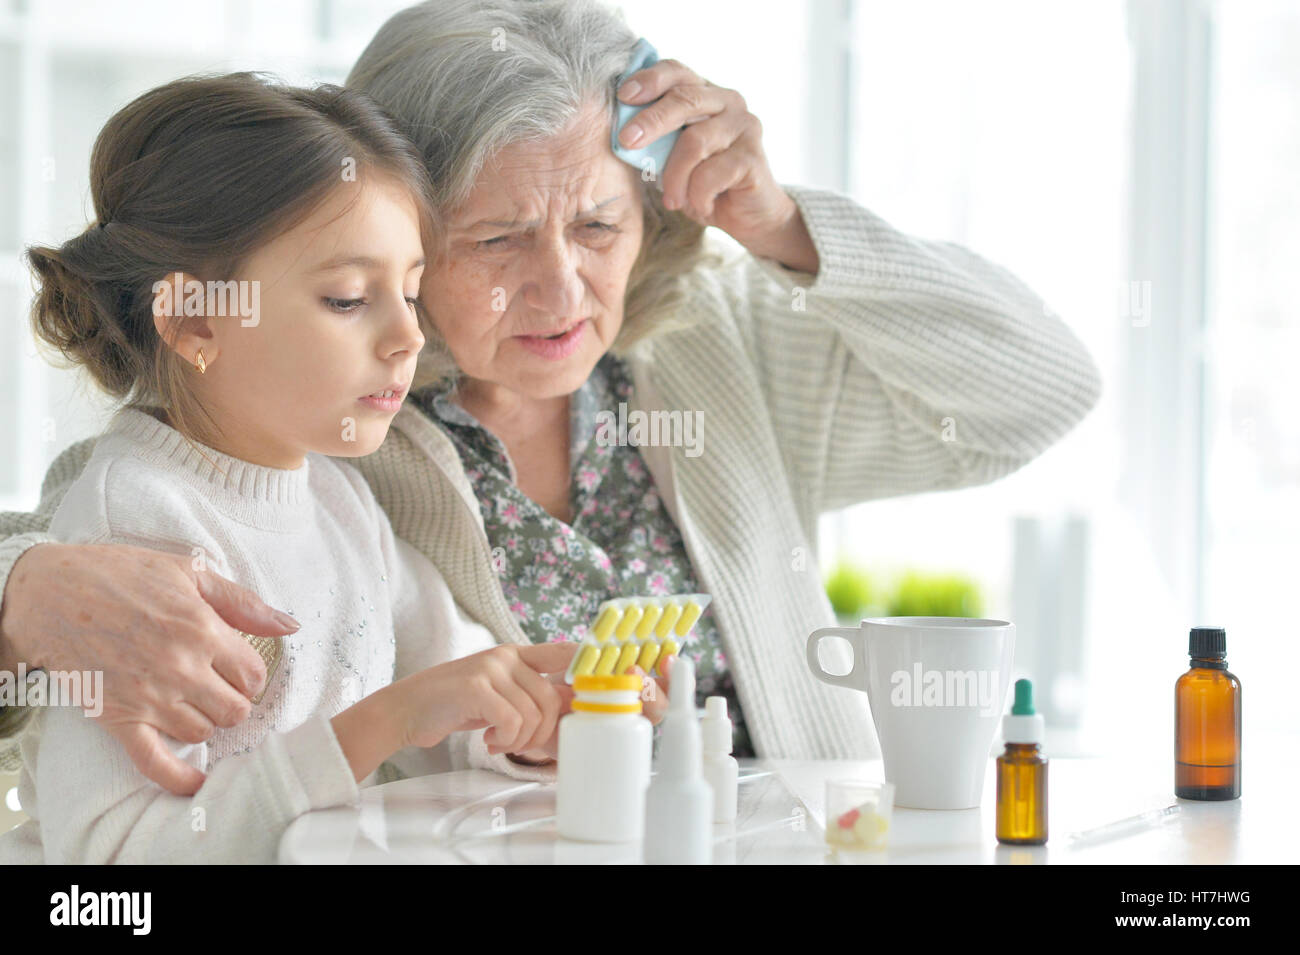 Granddaughter takes care of a sick grandmother Stock Photo